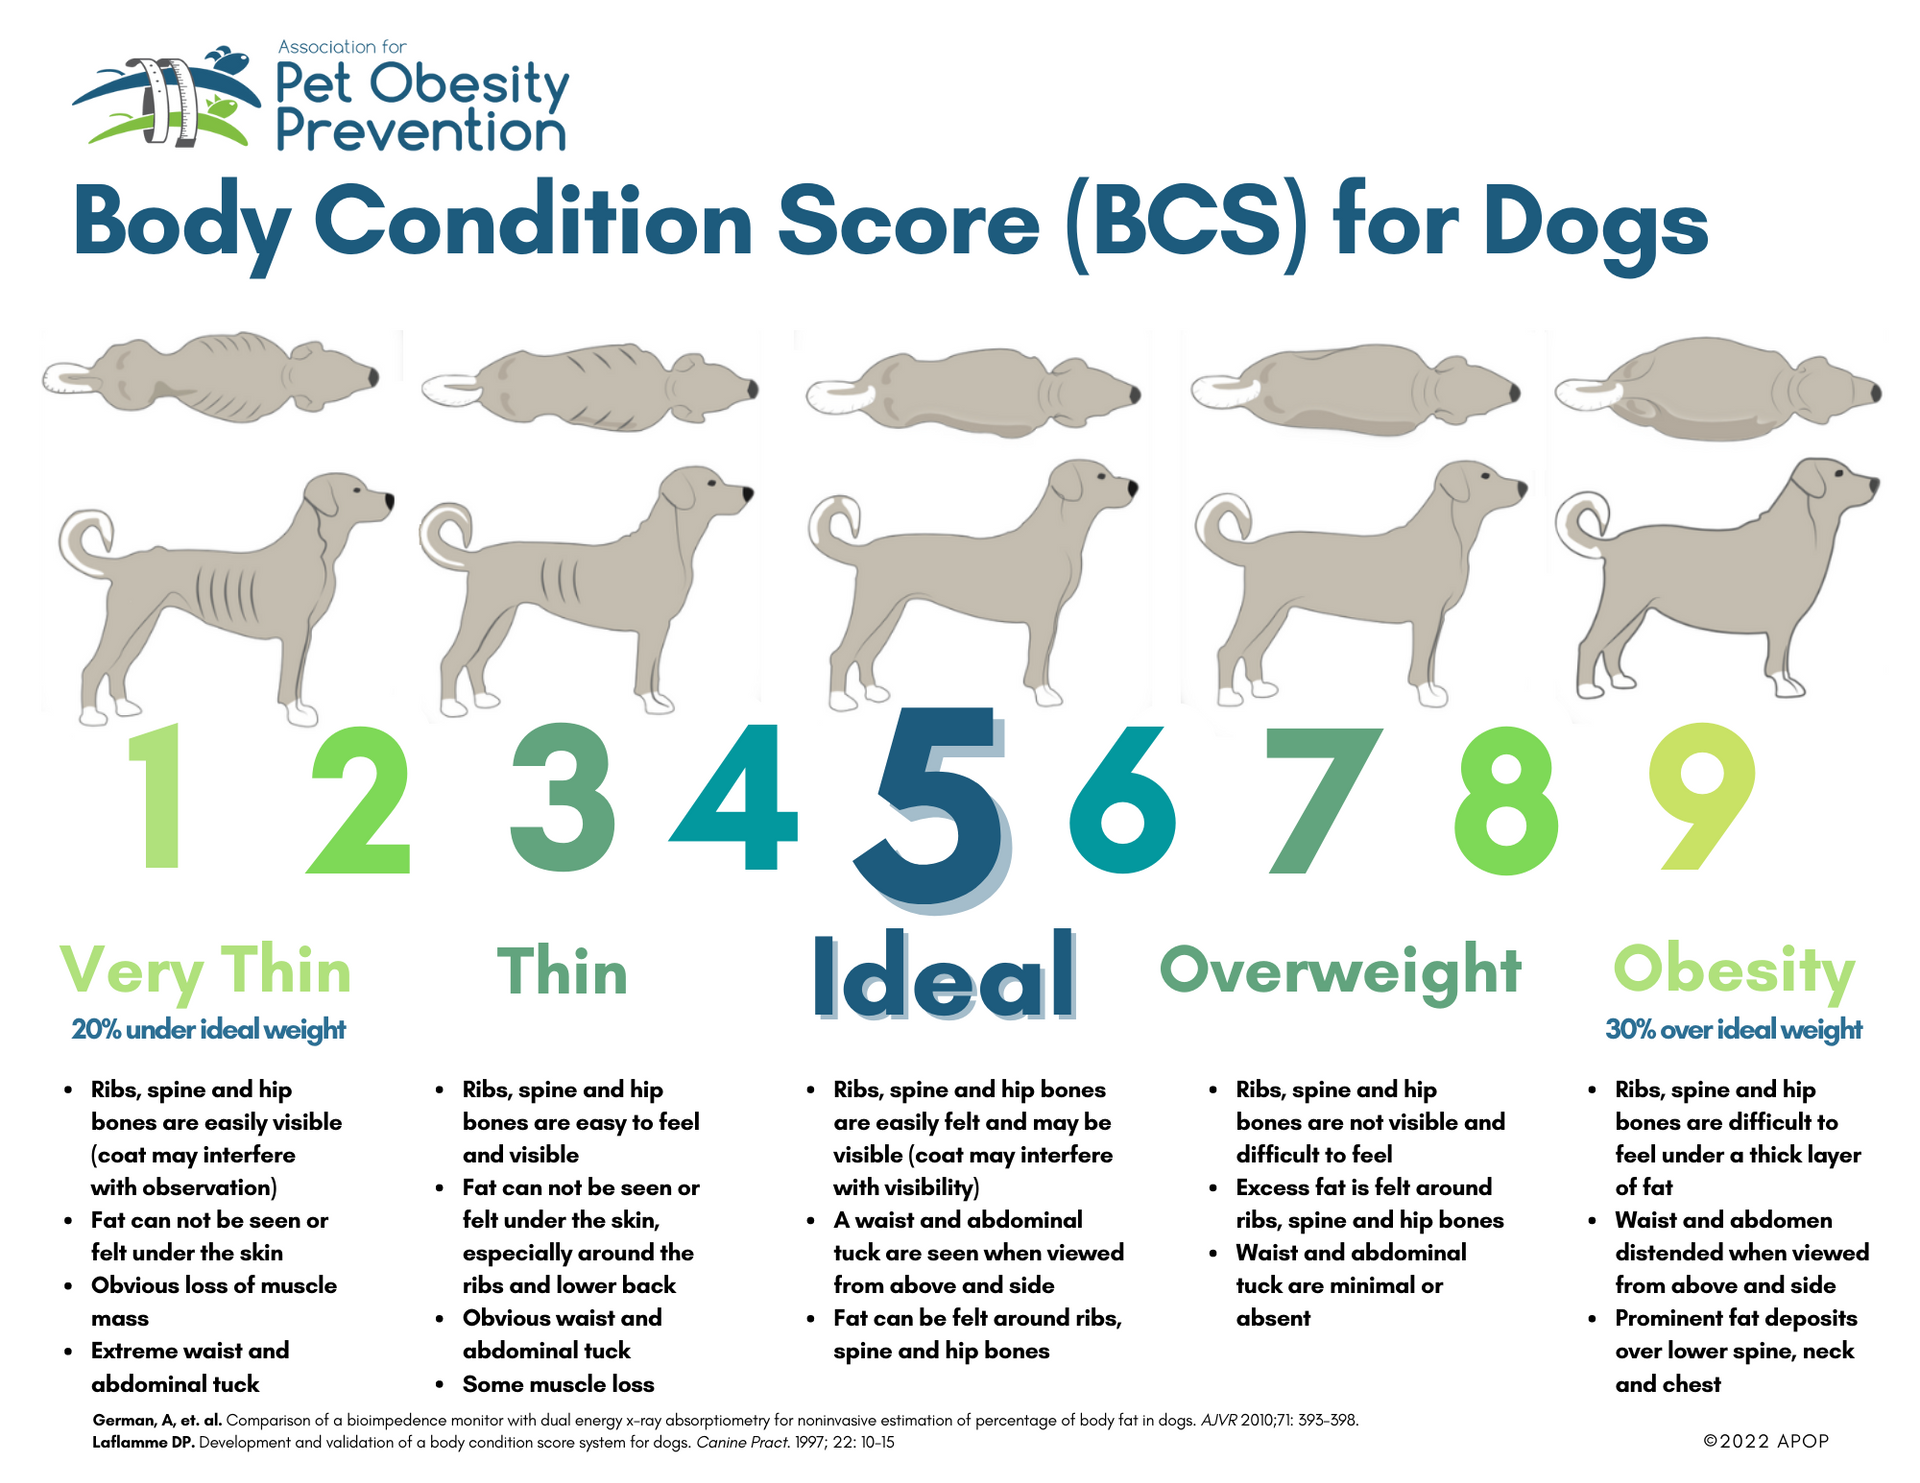 A poster showing the body condition score ( bcs ) for dogs.